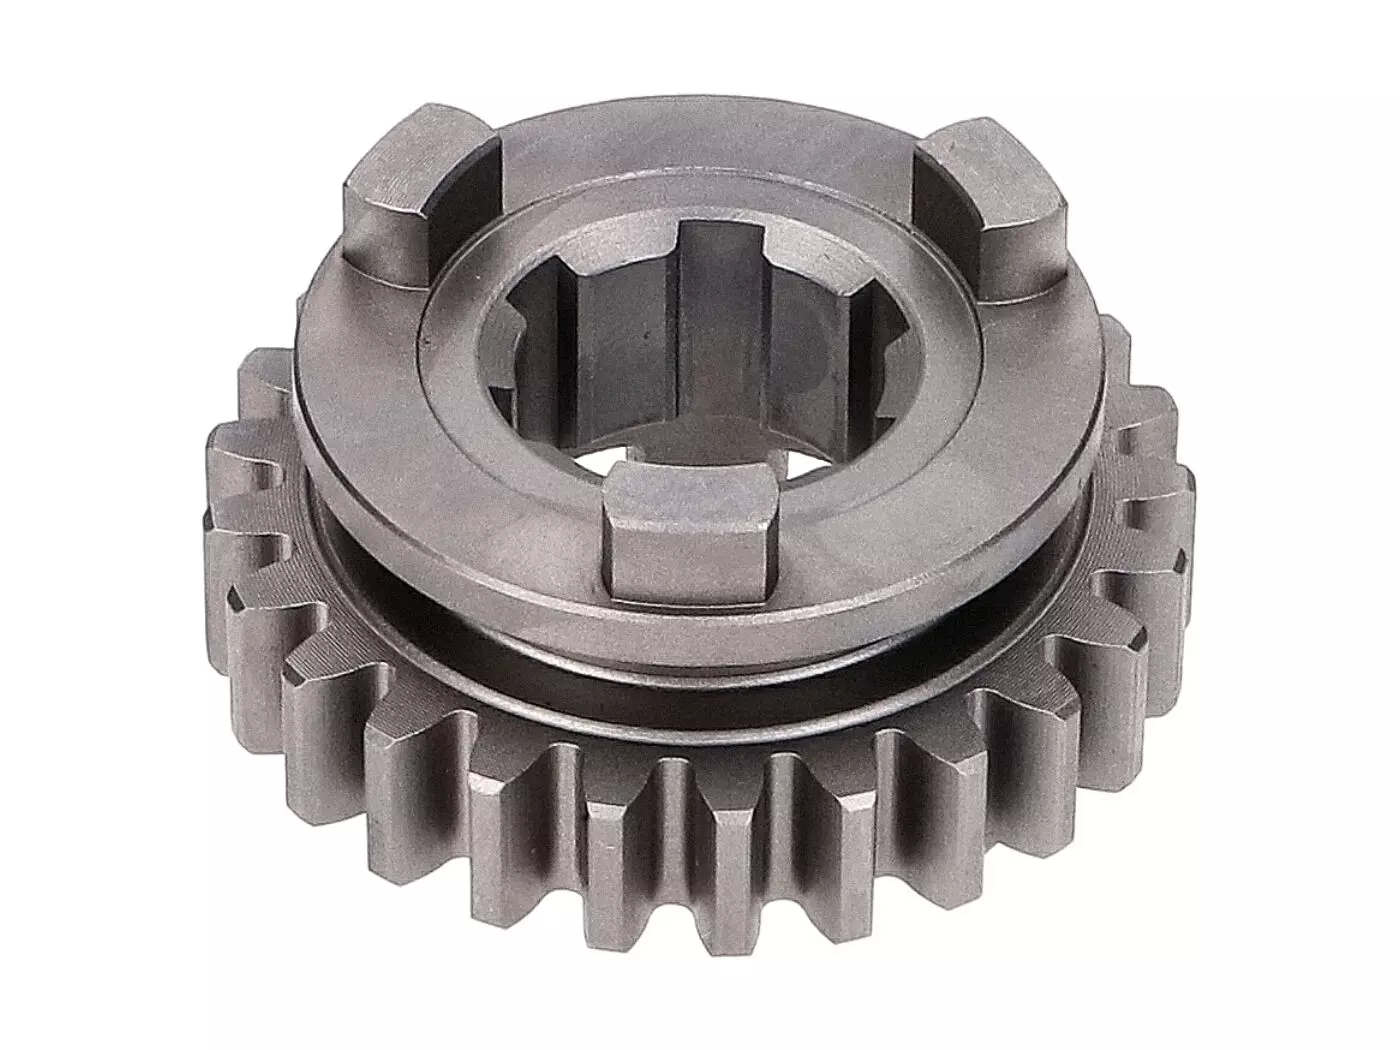 5th Speed Secondary Transmission Gear TP 25 Teeth For Minarelli AM6 2nd Series